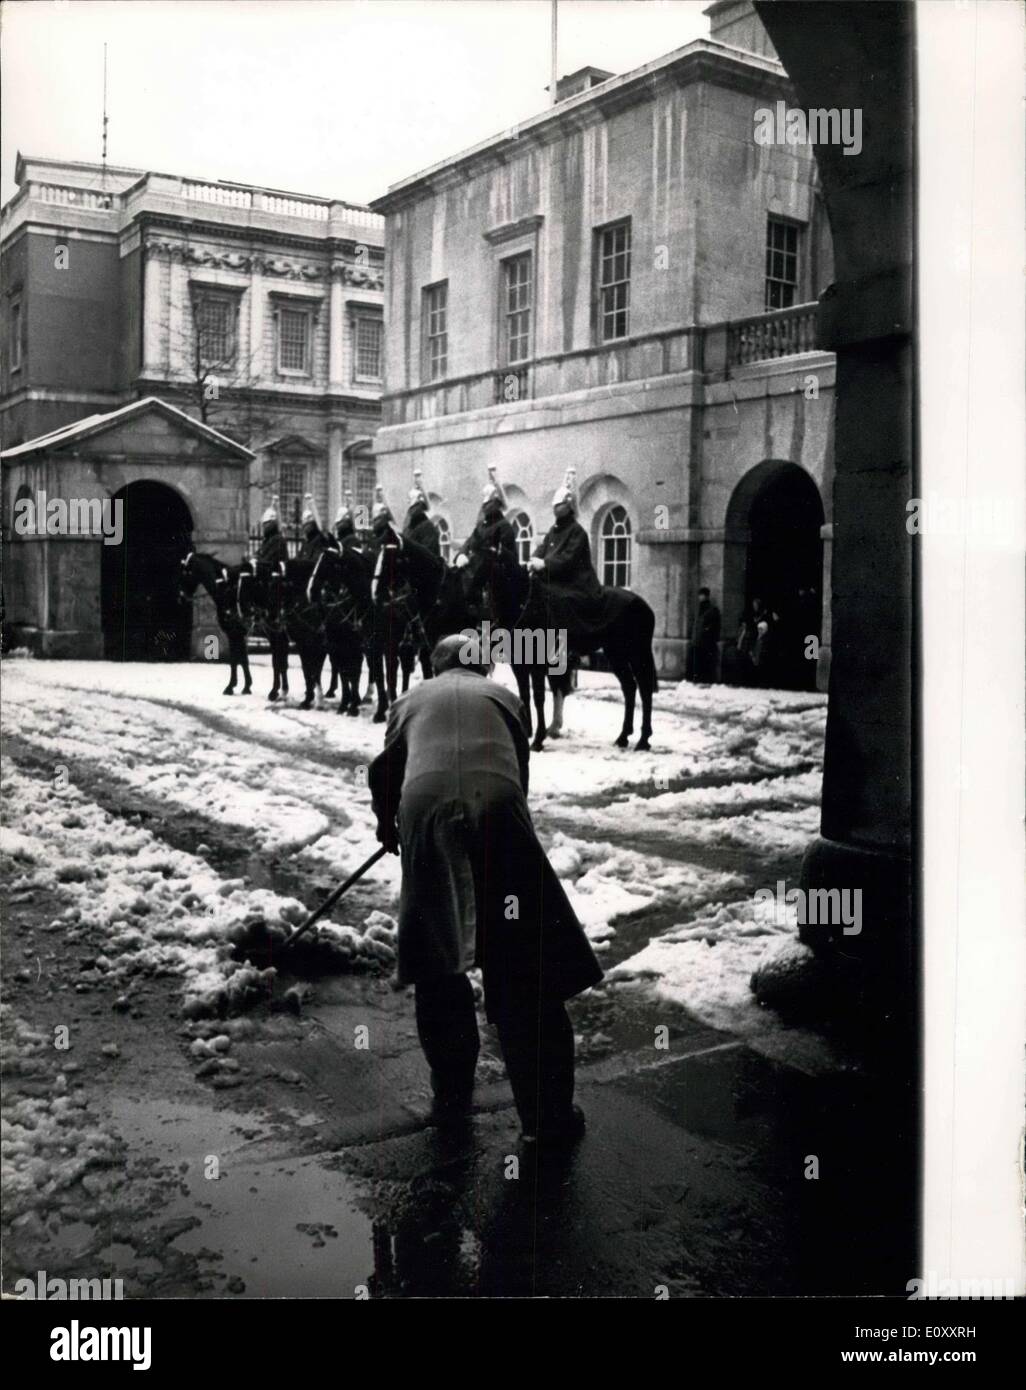 Jan. 09, 1968 - Snow Scenes in London. hoto Shows: Guard changing takes place at Horse Guards Parade this morning, as Stock Photo